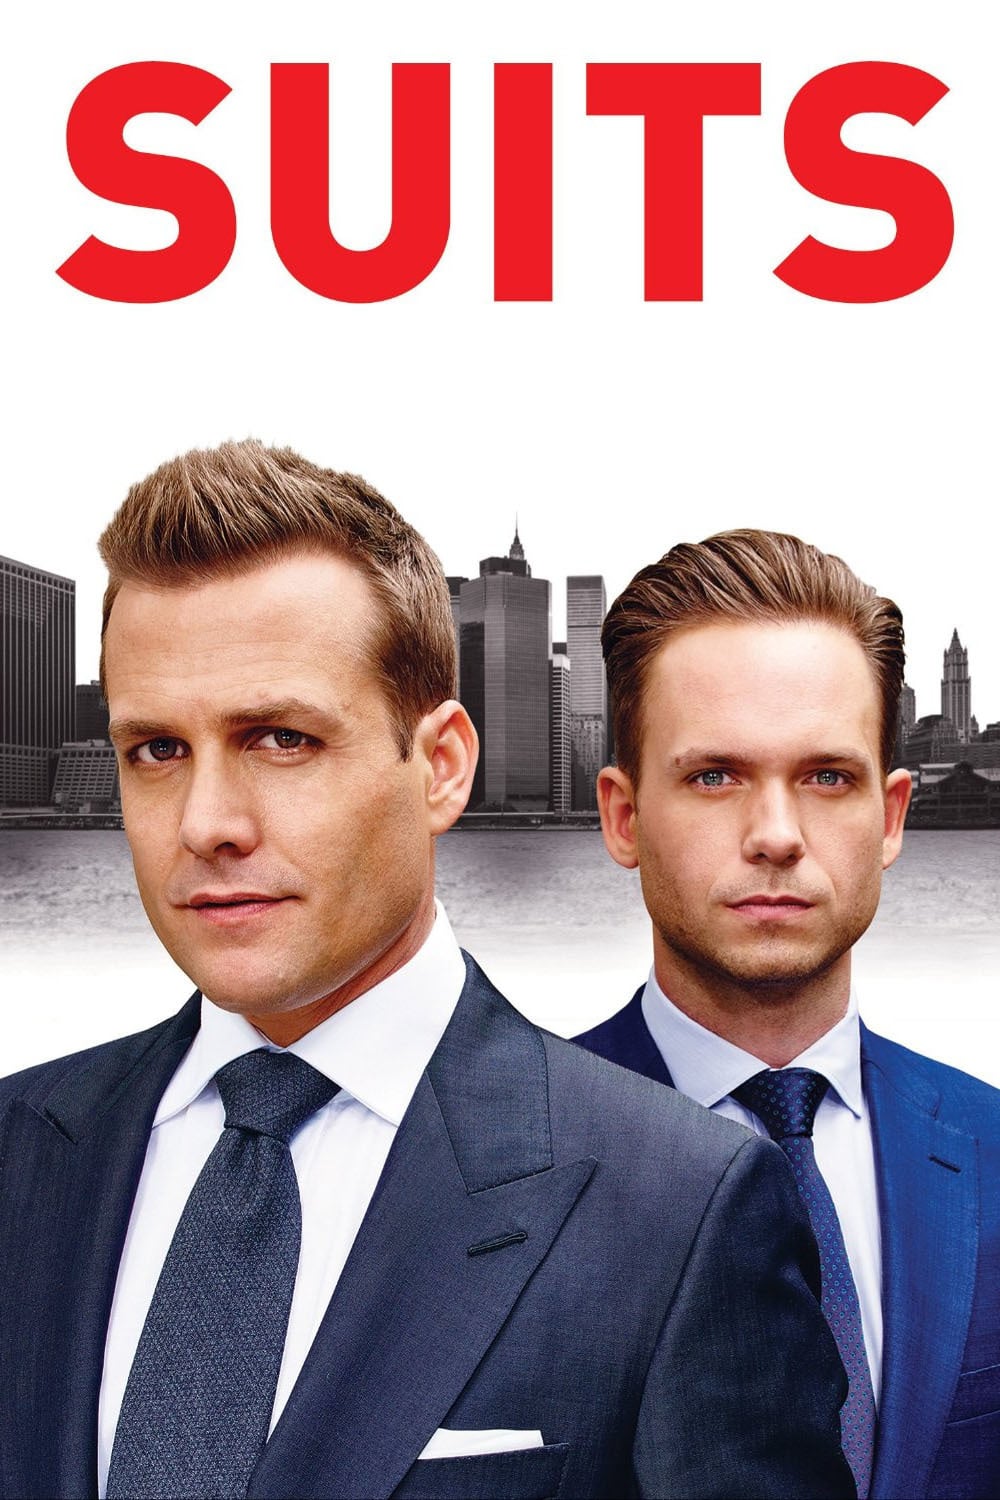 Suits rating